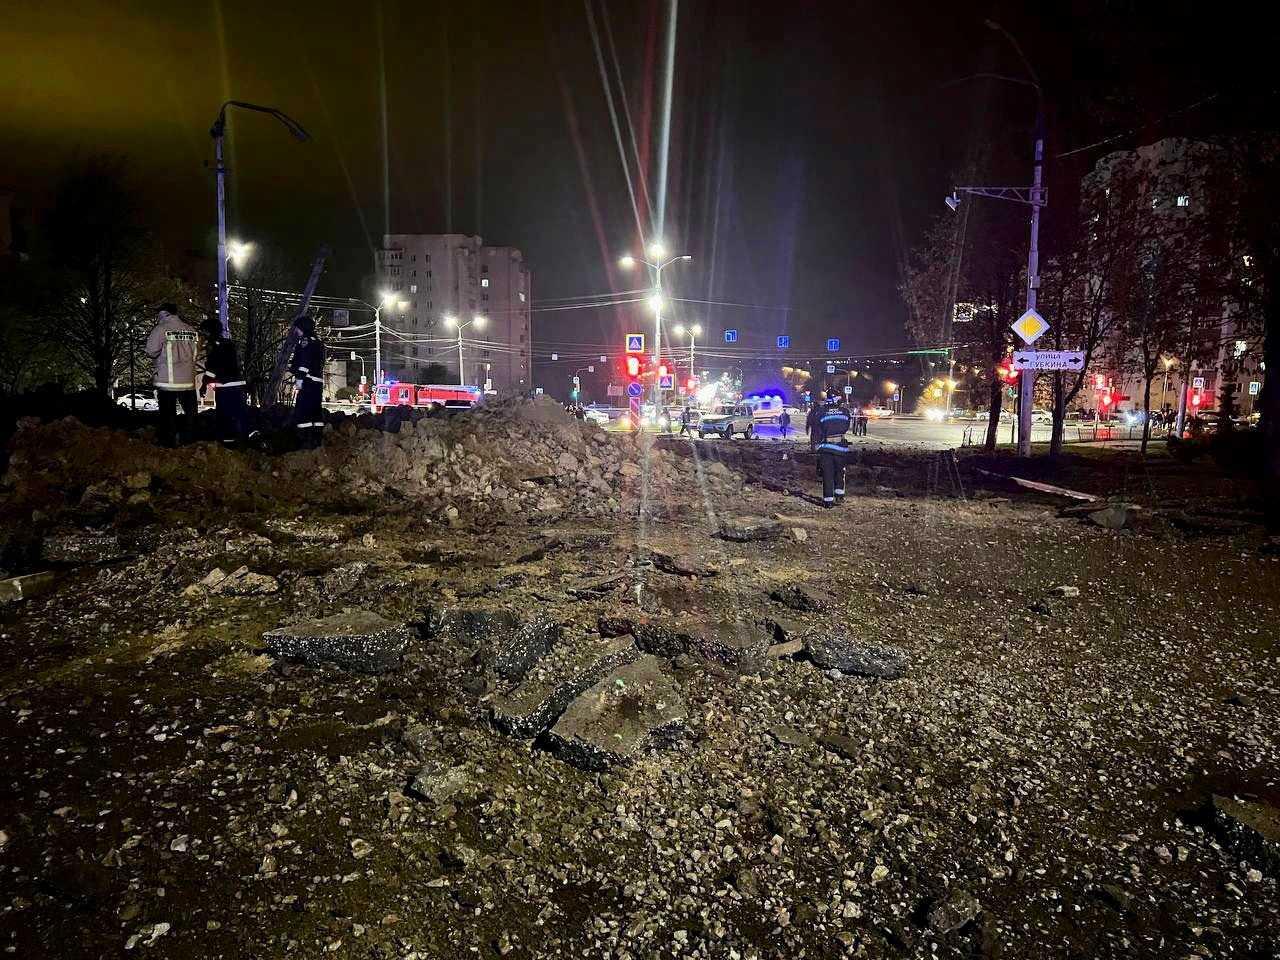 The accident scene following a large blast in a street in the city of Belgorod, Russia, April 20. Photo: Reuters 